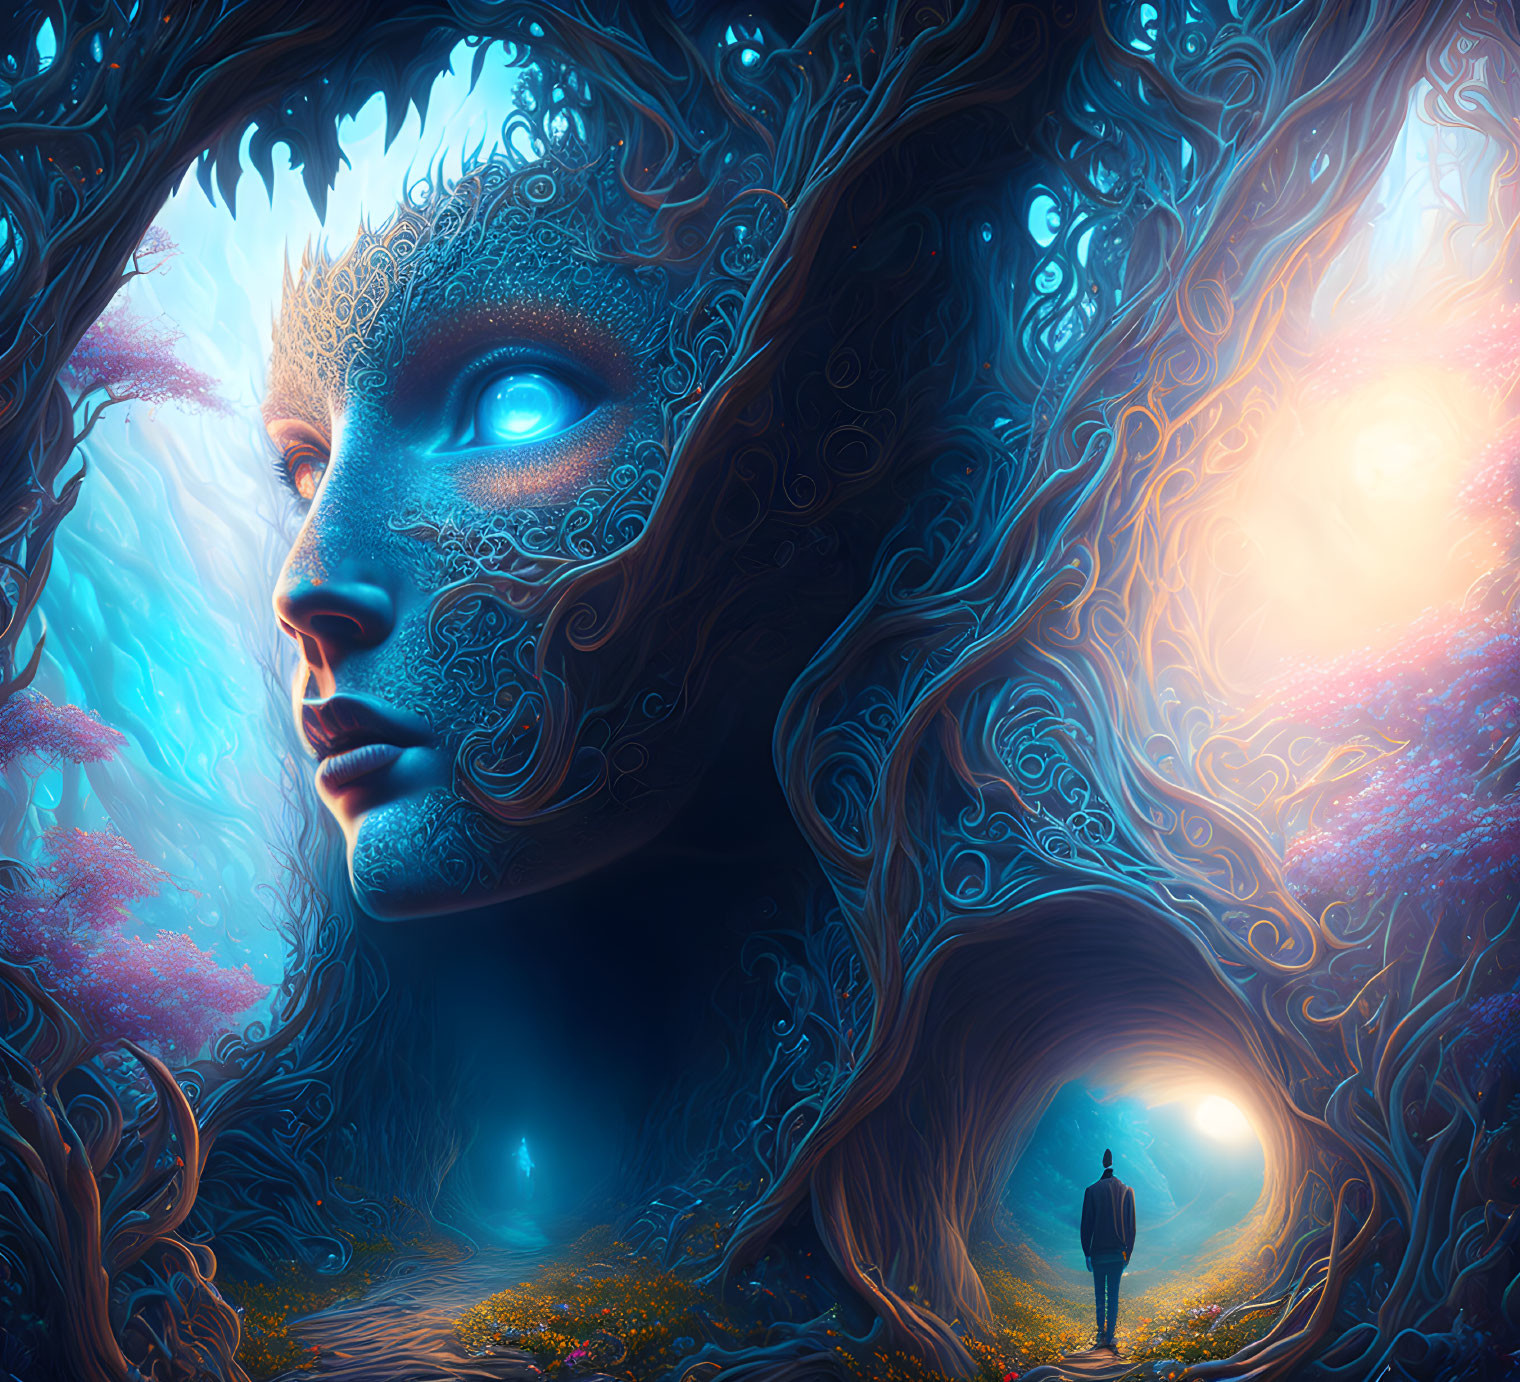 Colorful digital artwork: Blue face with intricate patterns in fantastical tree scenery